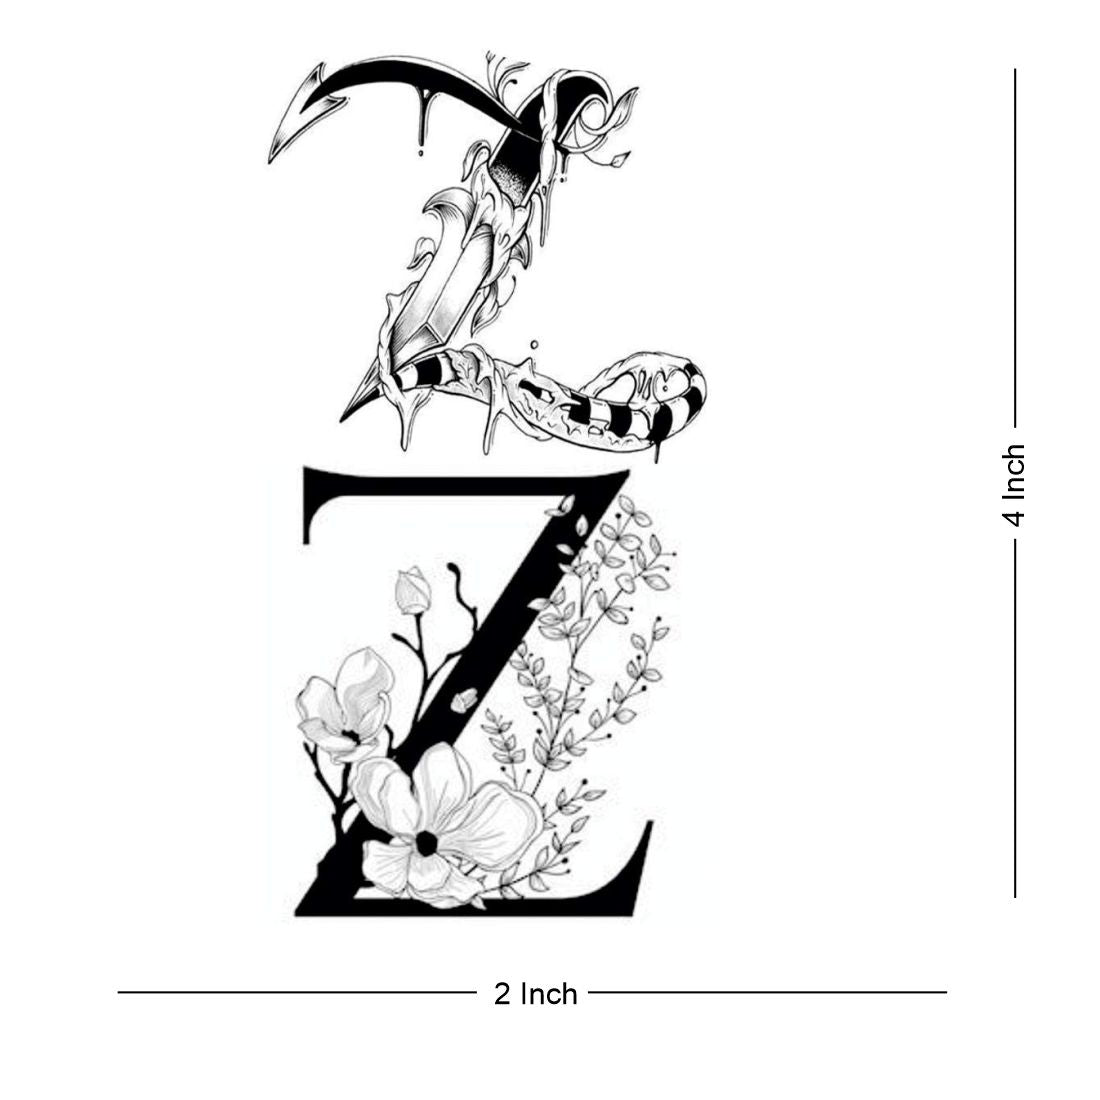 30 Letter Z Tattoo Designs, Ideas and Templates - YouTube